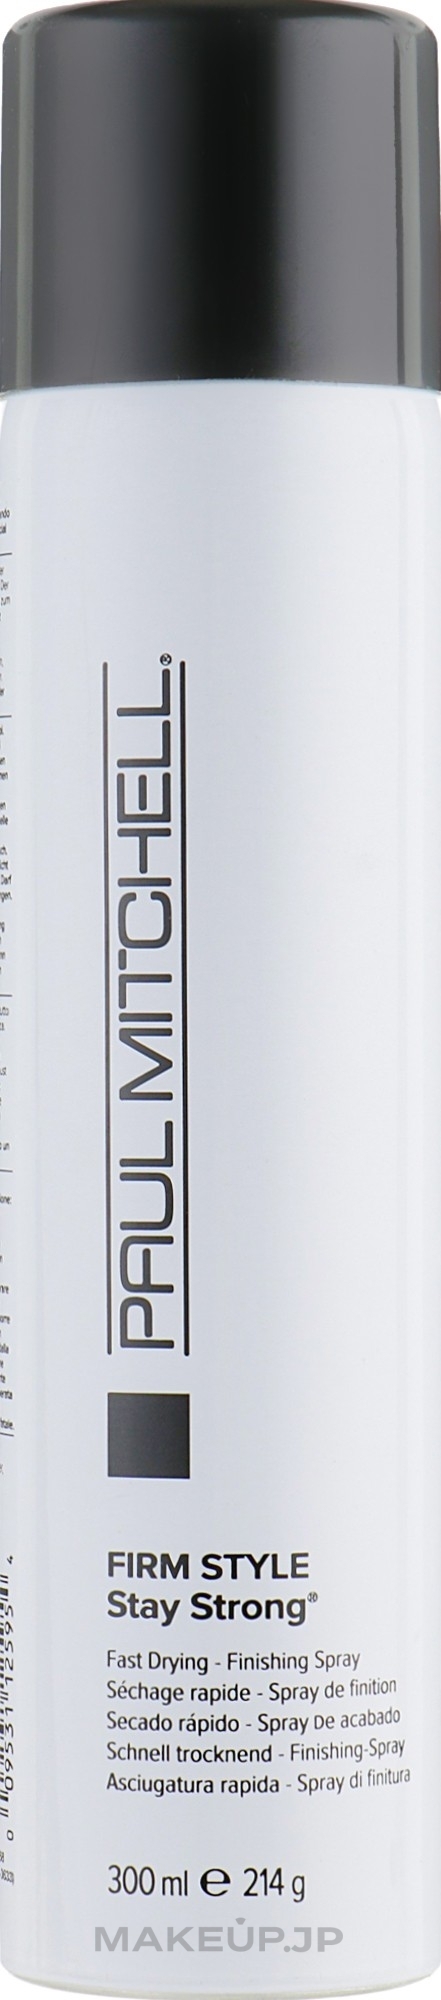 Strong Hold Hair Spray - Paul Mitchell Firm Style Stay Strong Finishing Spray — photo 300 ml